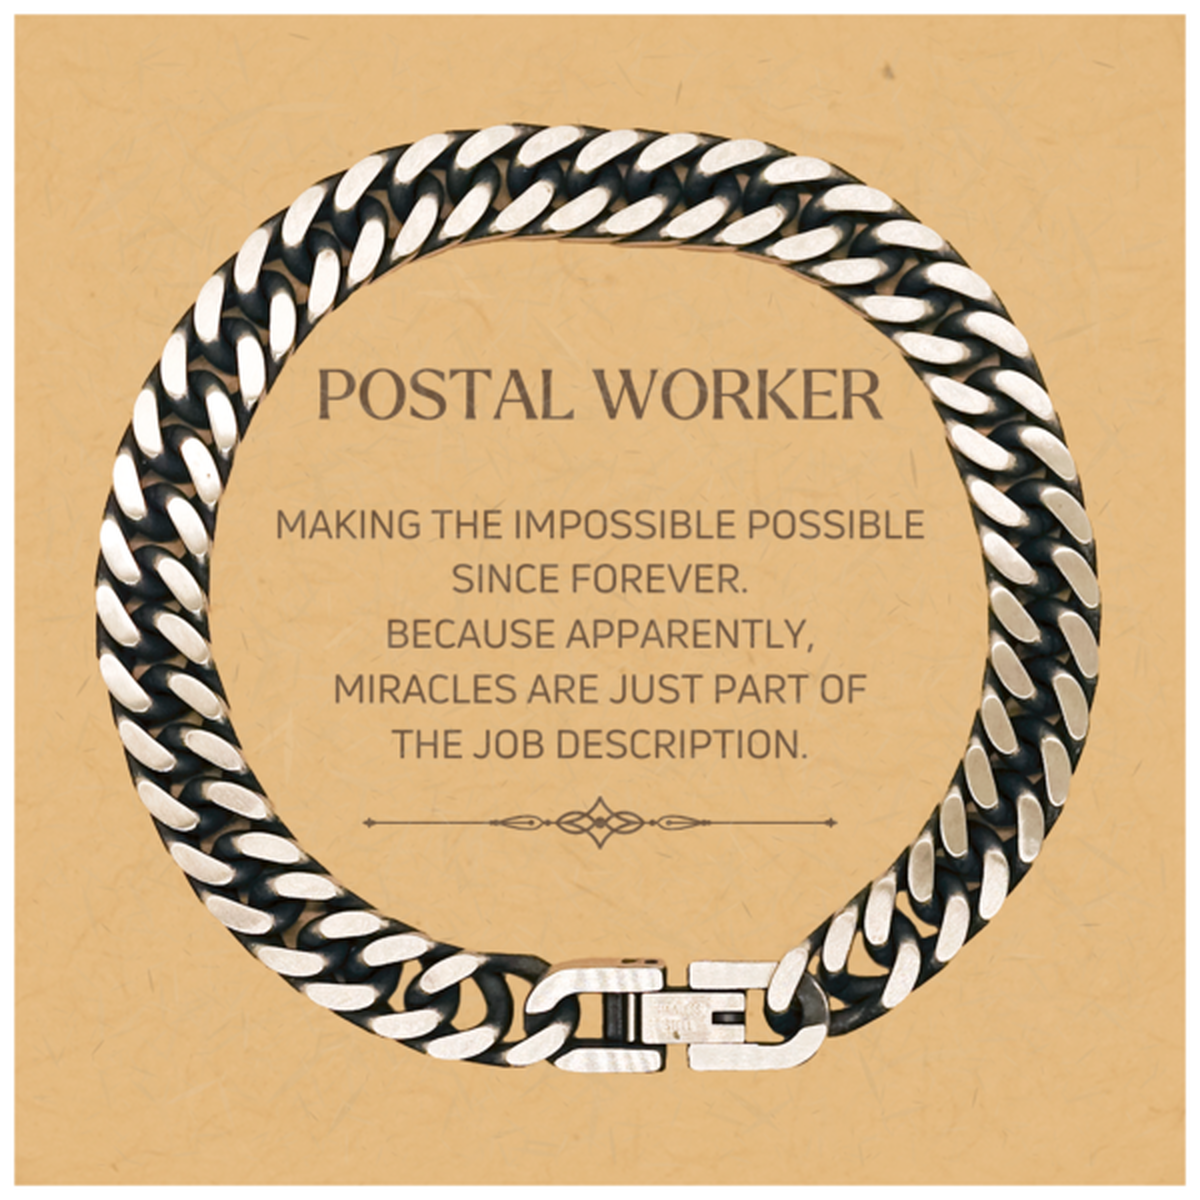 Funny Postal Worker Gifts, Miracles are just part of the job description, Inspirational Birthday Christmas Cuban Link Chain Bracelet For Postal Worker, Men, Women, Coworkers, Friends, Boss